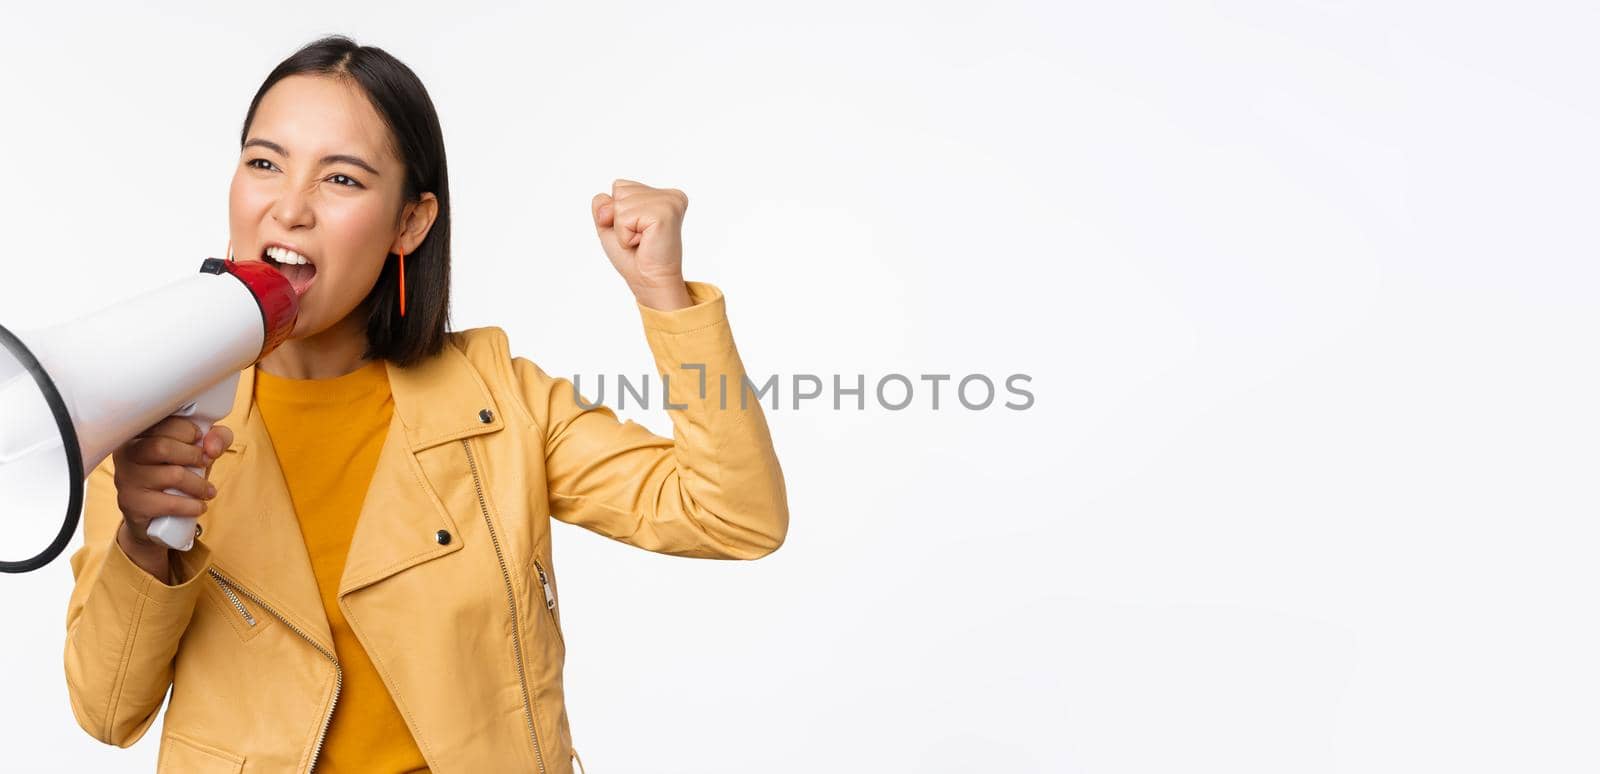 Portrait of young asian woman protester, screaming in megaphone and protesting, standing confident against white background.